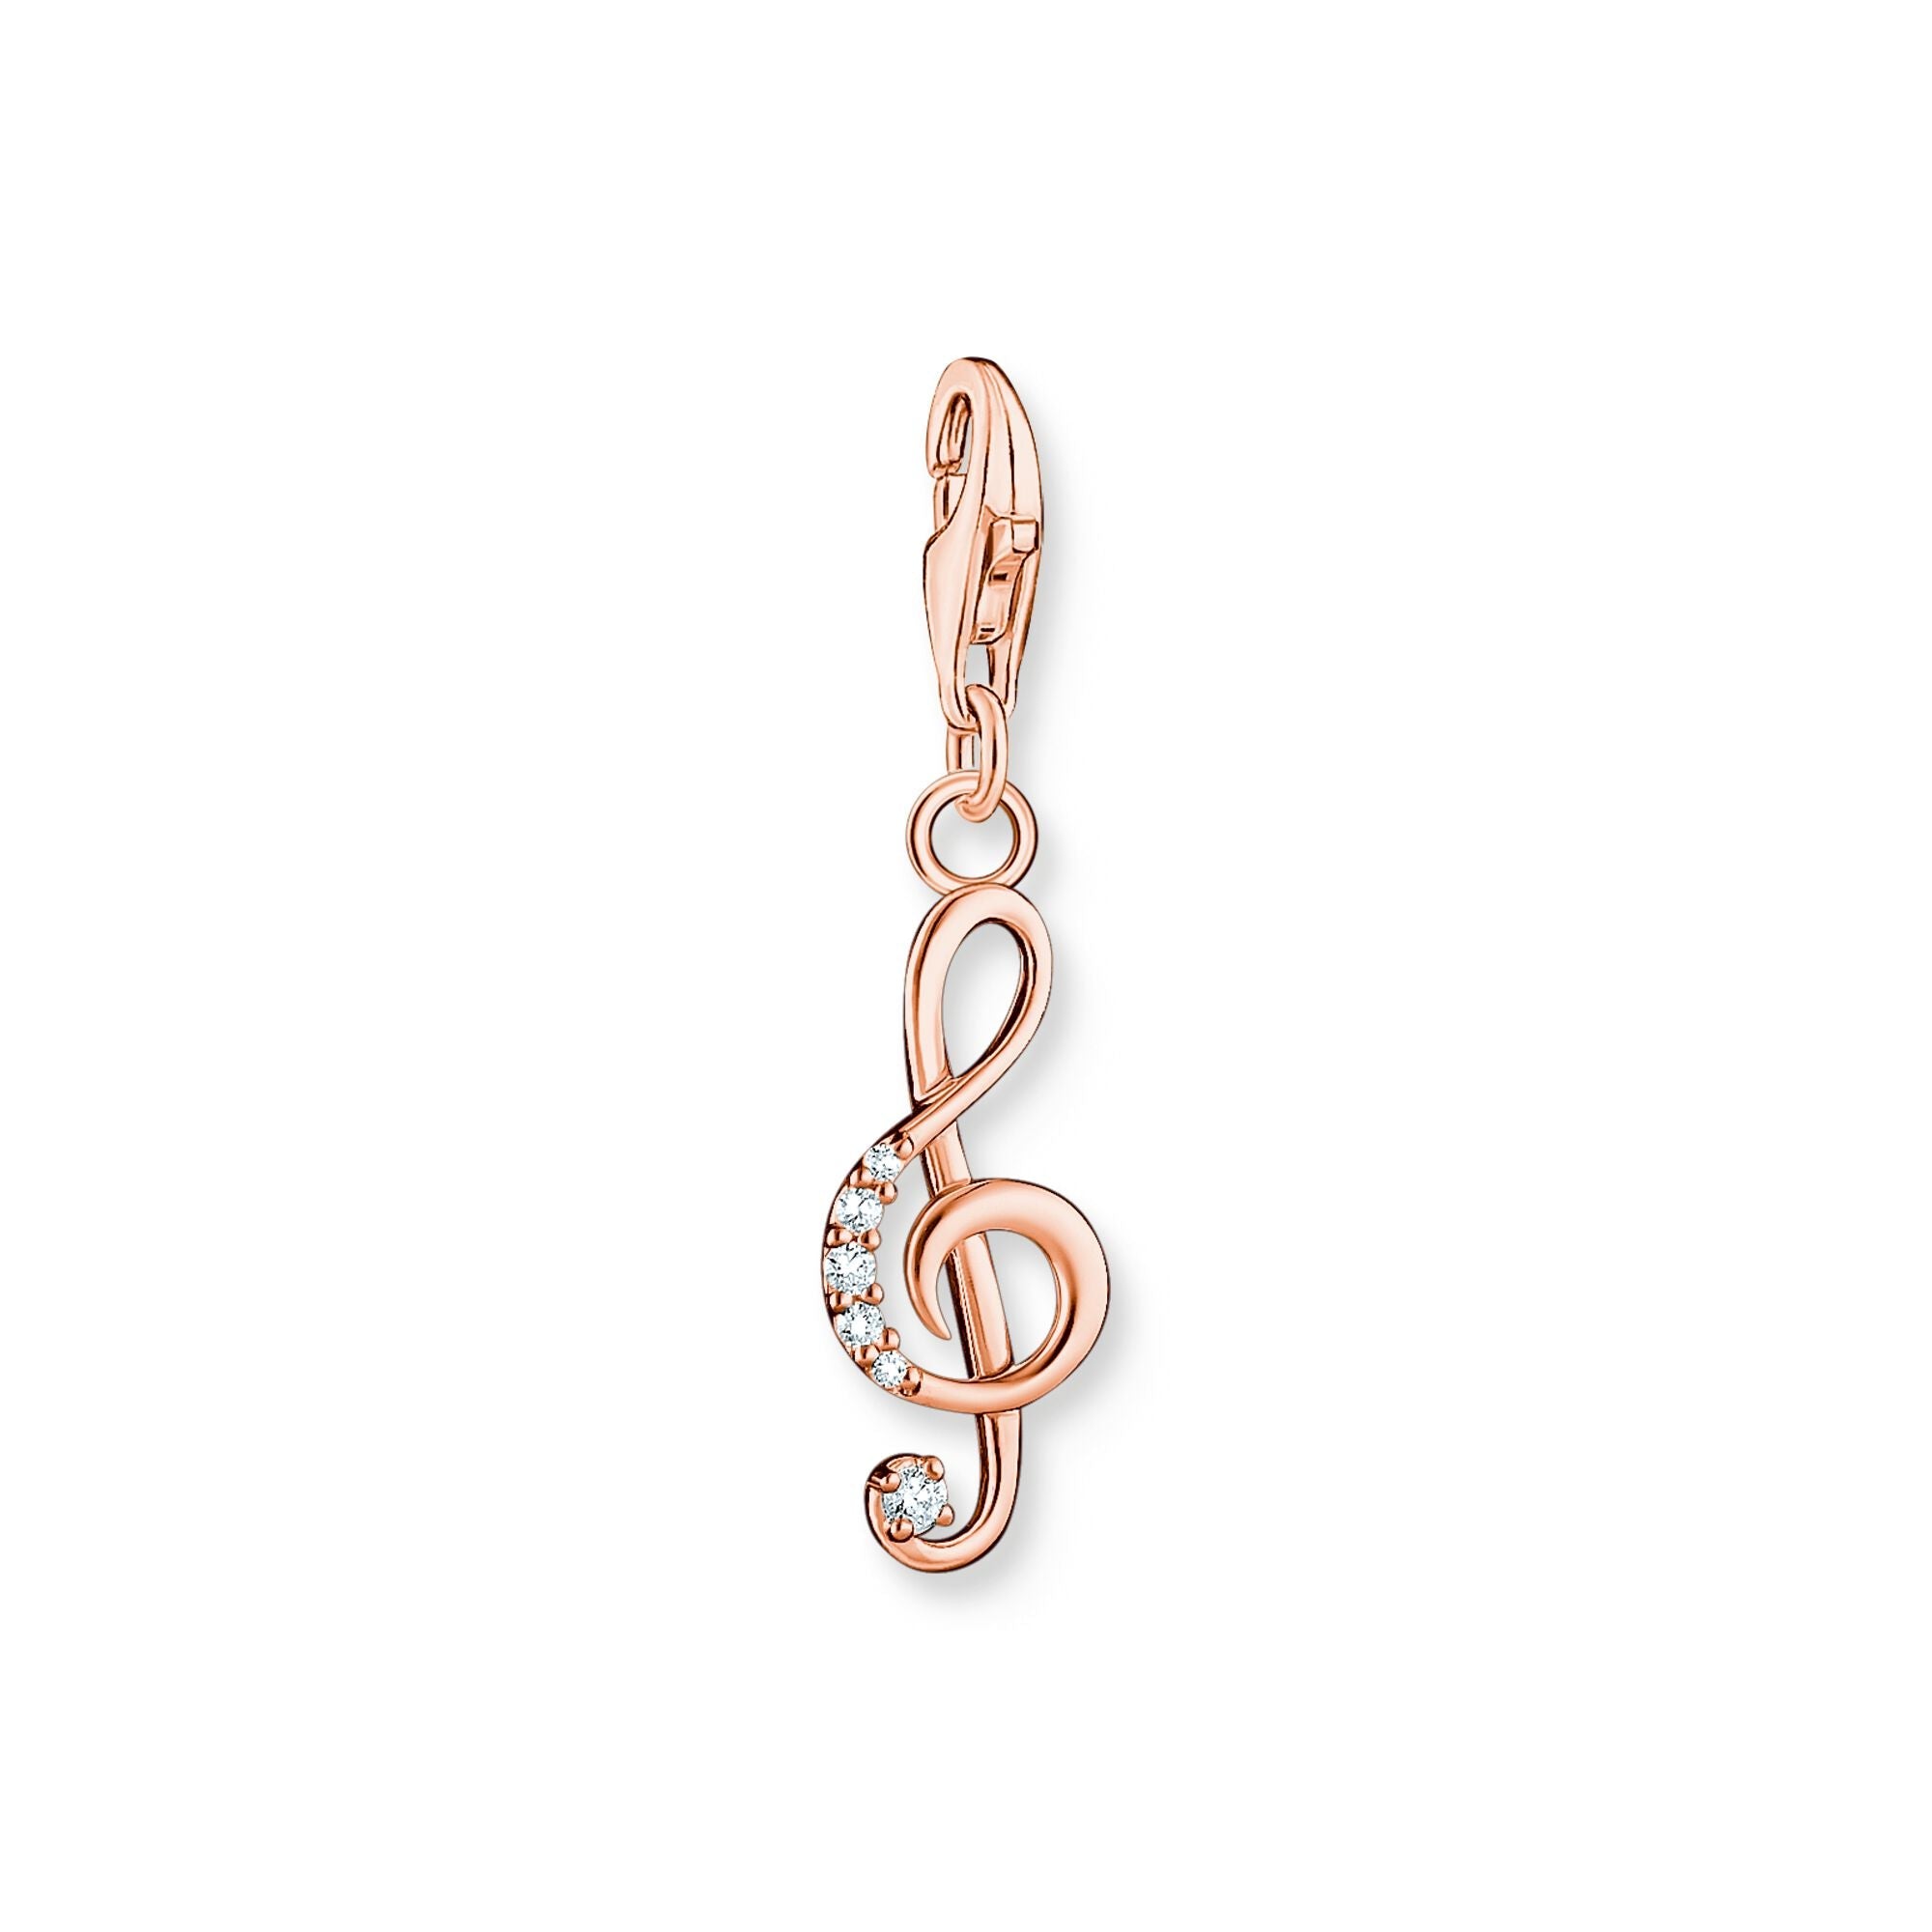 Thomas Sabo Rose Gold Plated Sterling Silver Musical Charm